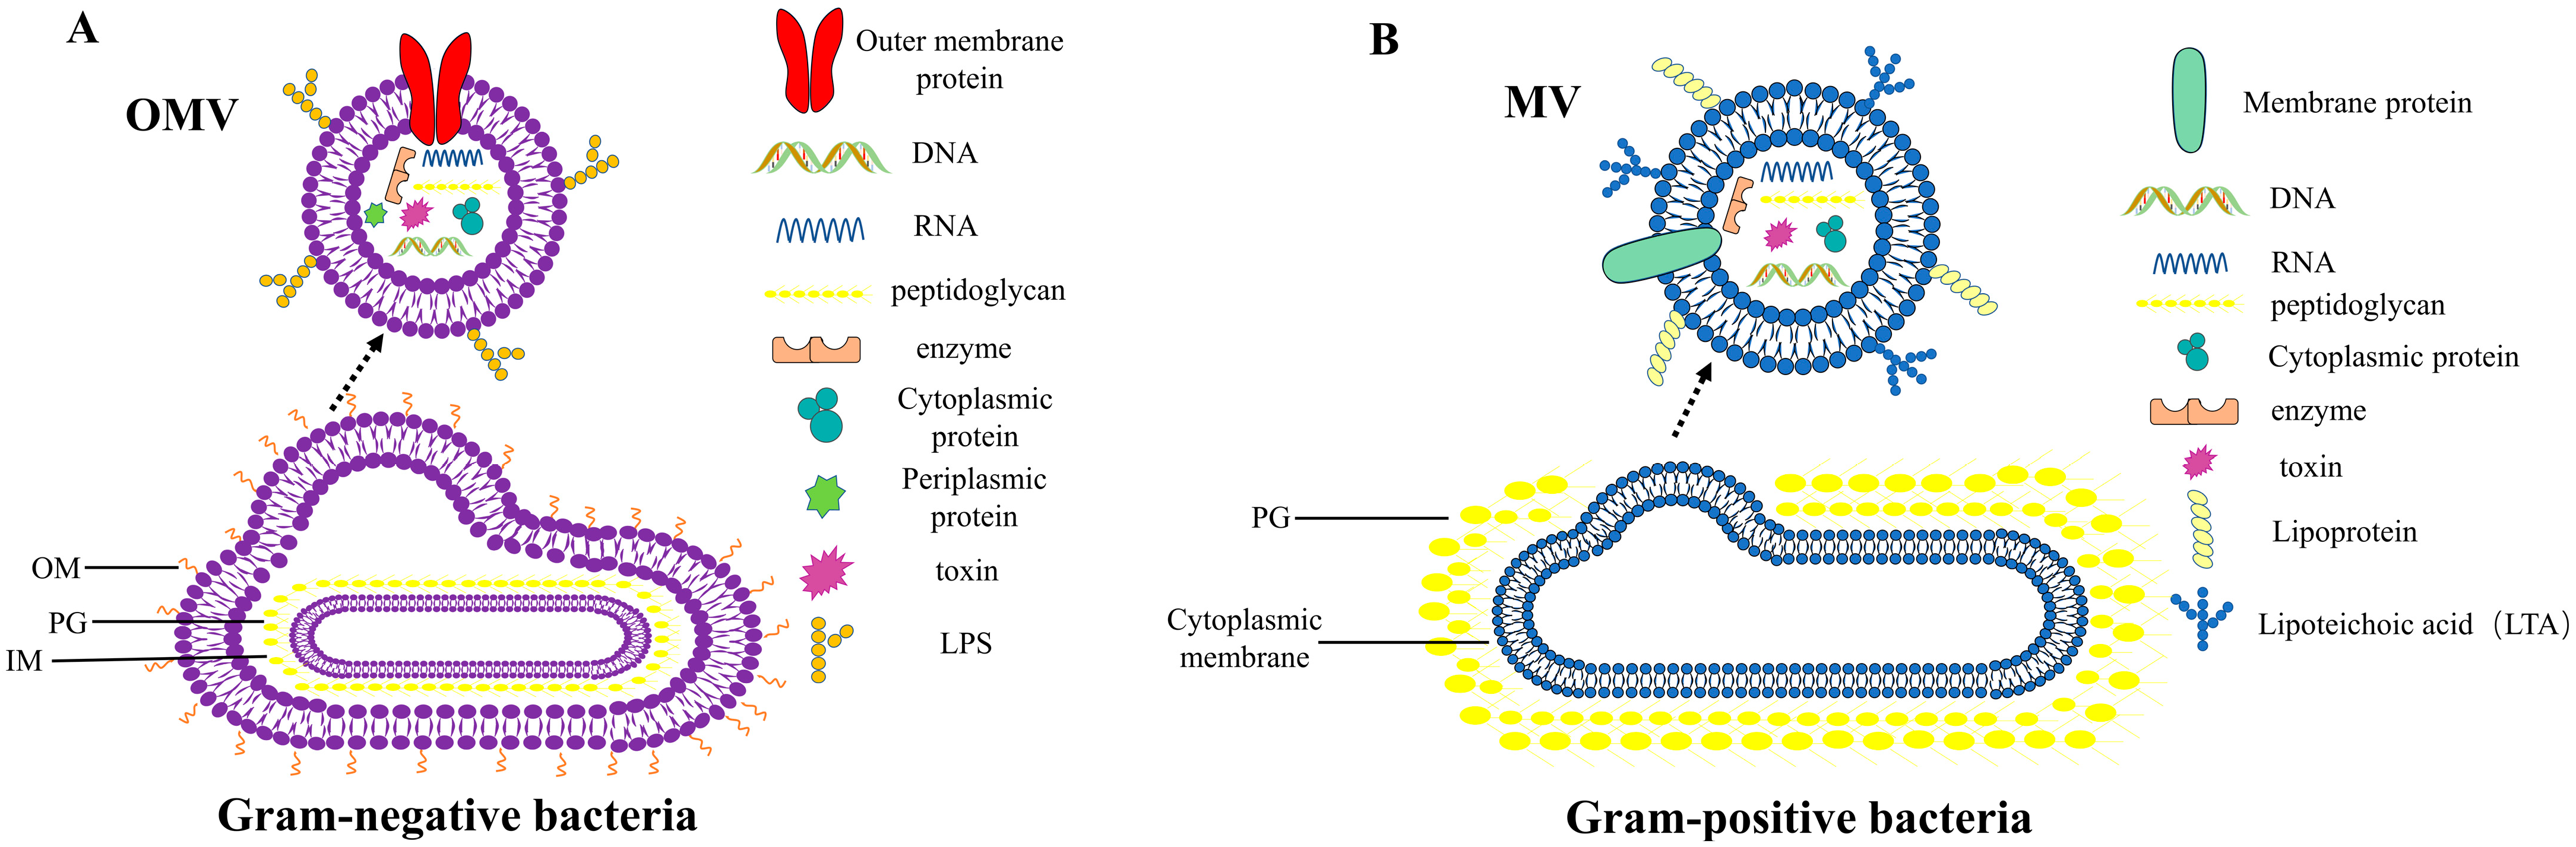 IJMS | Free Full-Text | Research Progress on Bacterial Membrane Vesicles  and Antibiotic Resistance